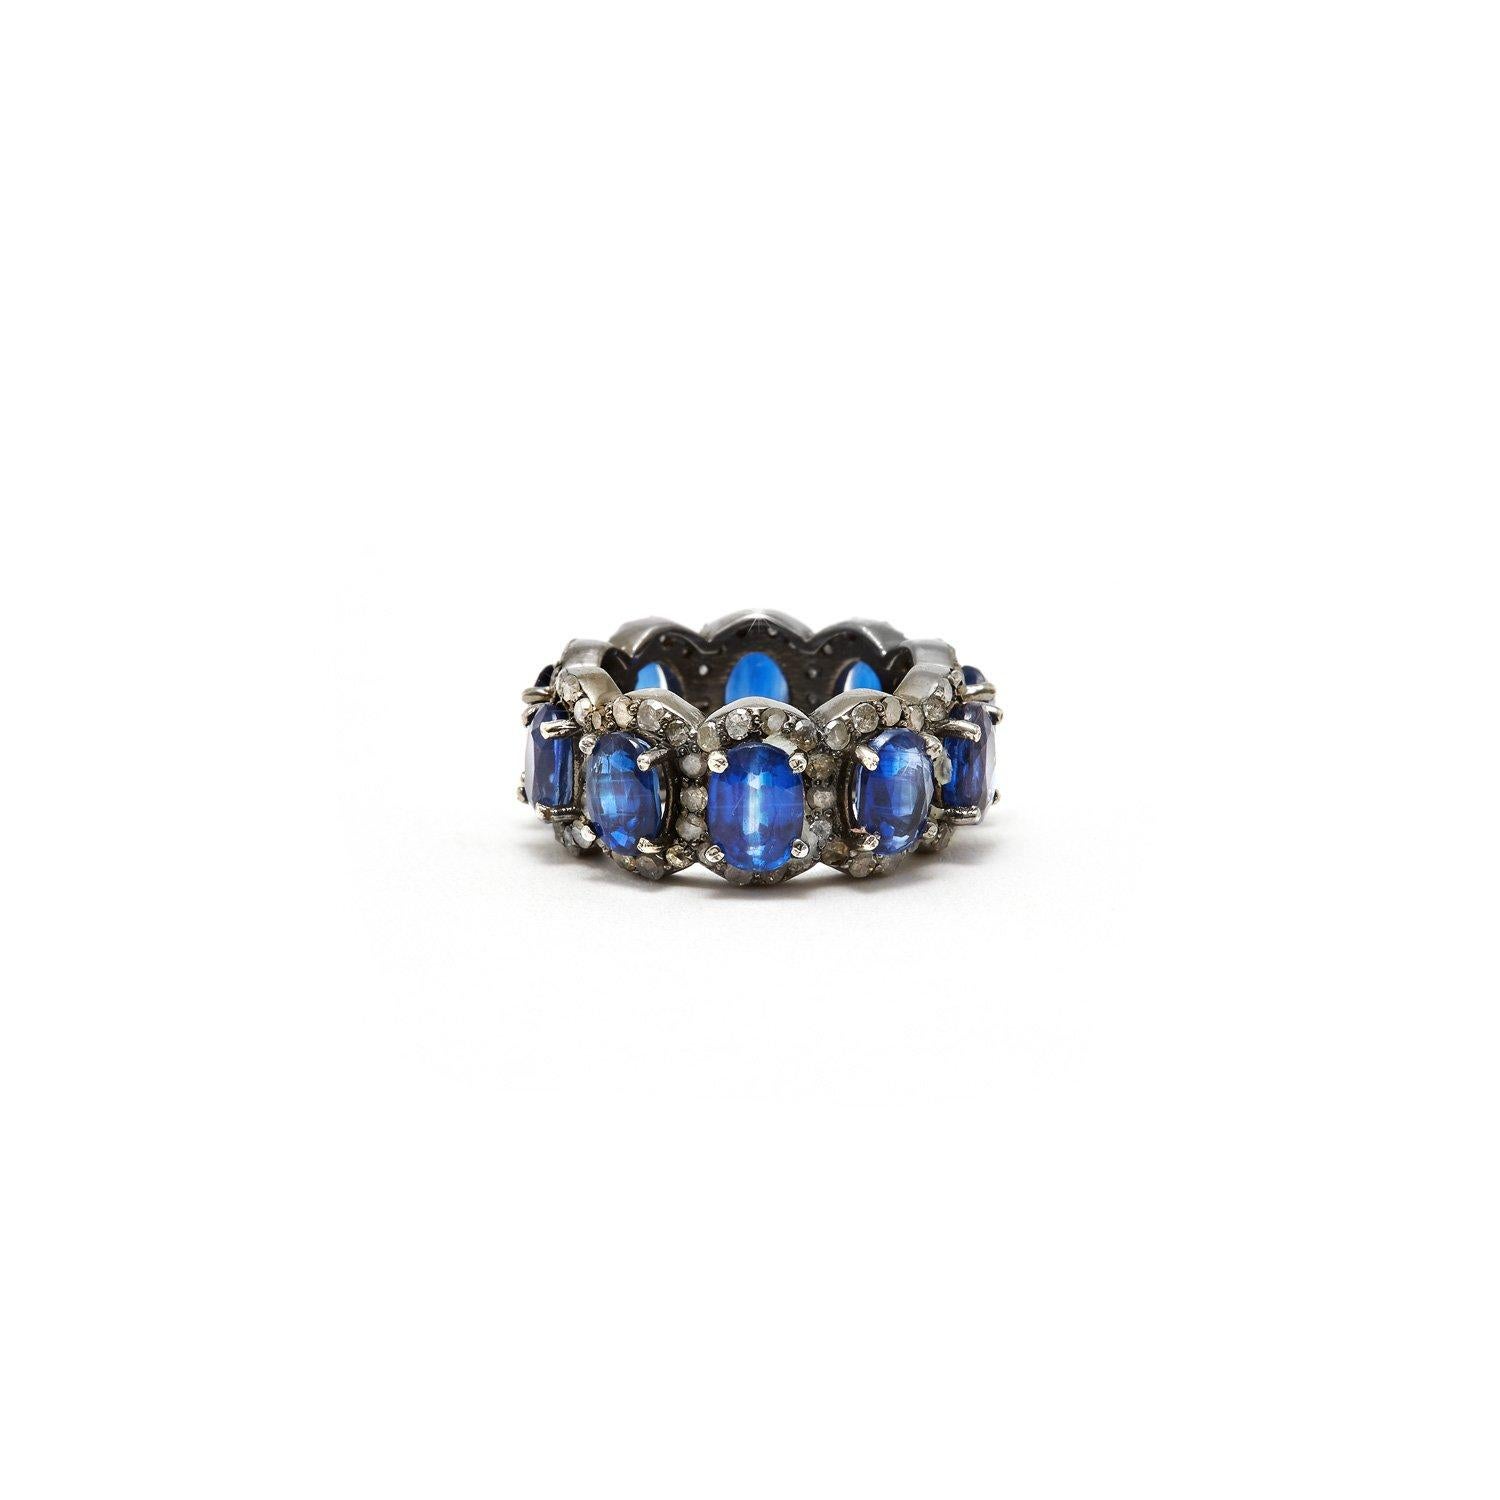 Stunning blue Kyanite baguettes accented with white Diamonds in a blackened silver band reminiscent of an Art Deco Tiara.

- Natural Blue Kyanite.
- White Diamonds.
- Set in Blackened Oxidized Silver.